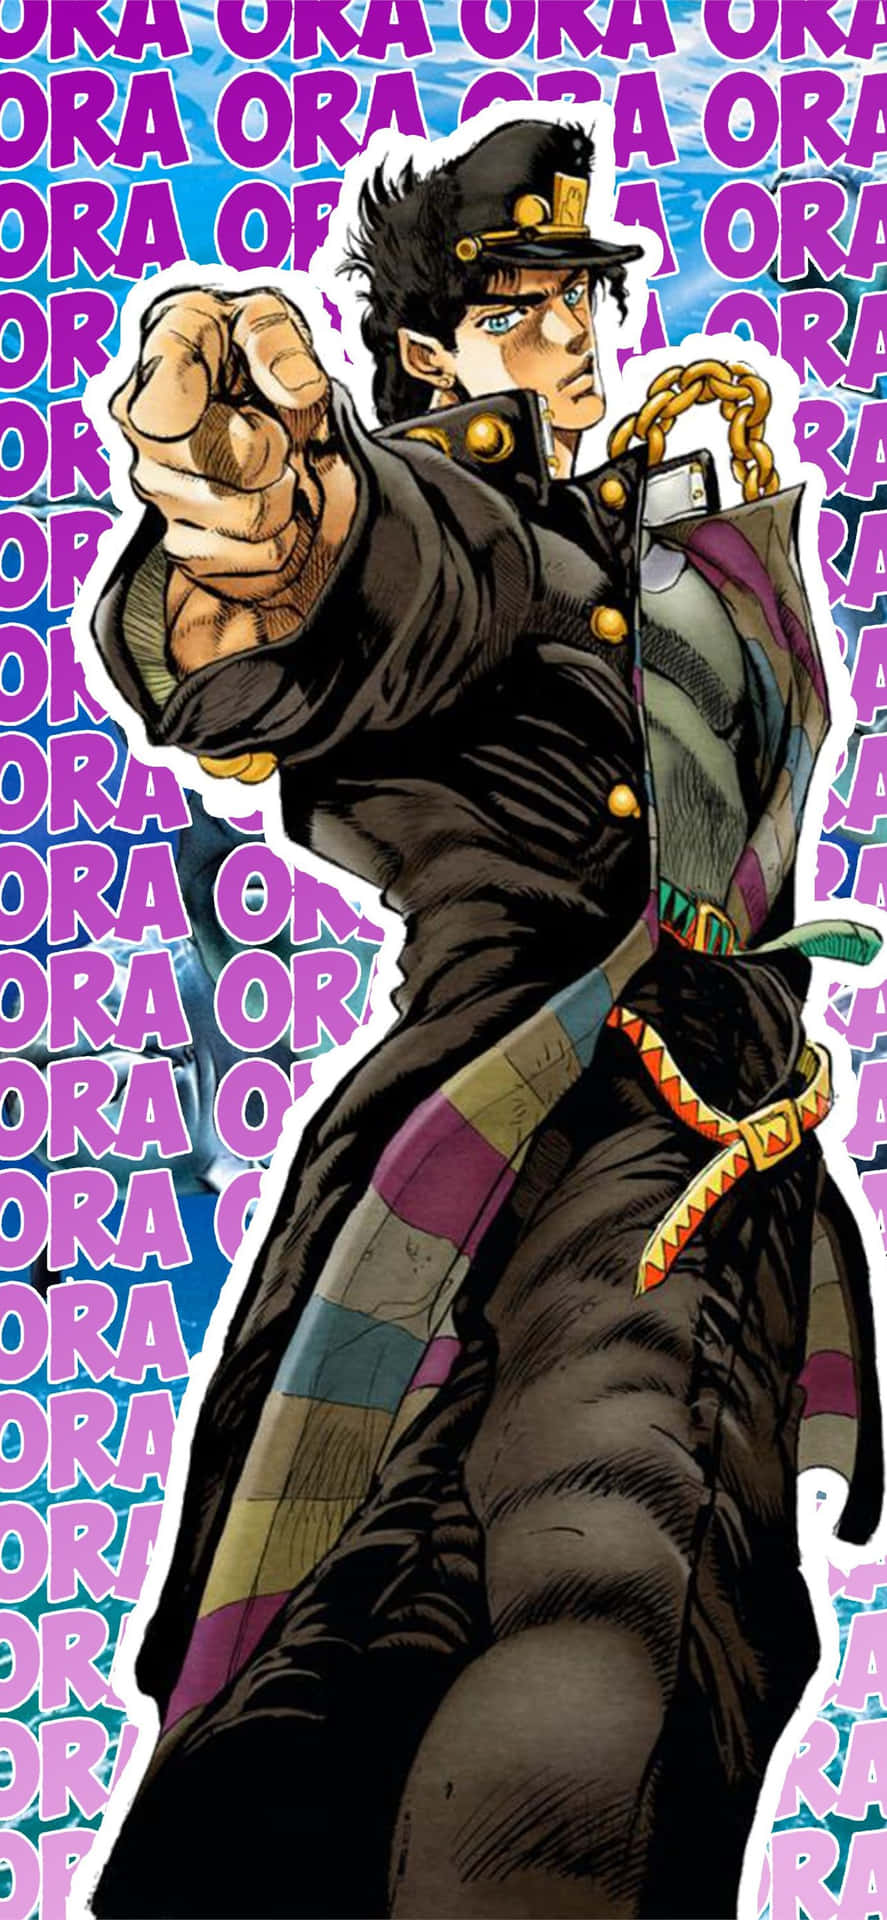 Jotaro Kujo posed with his signature cap and hunting jacket